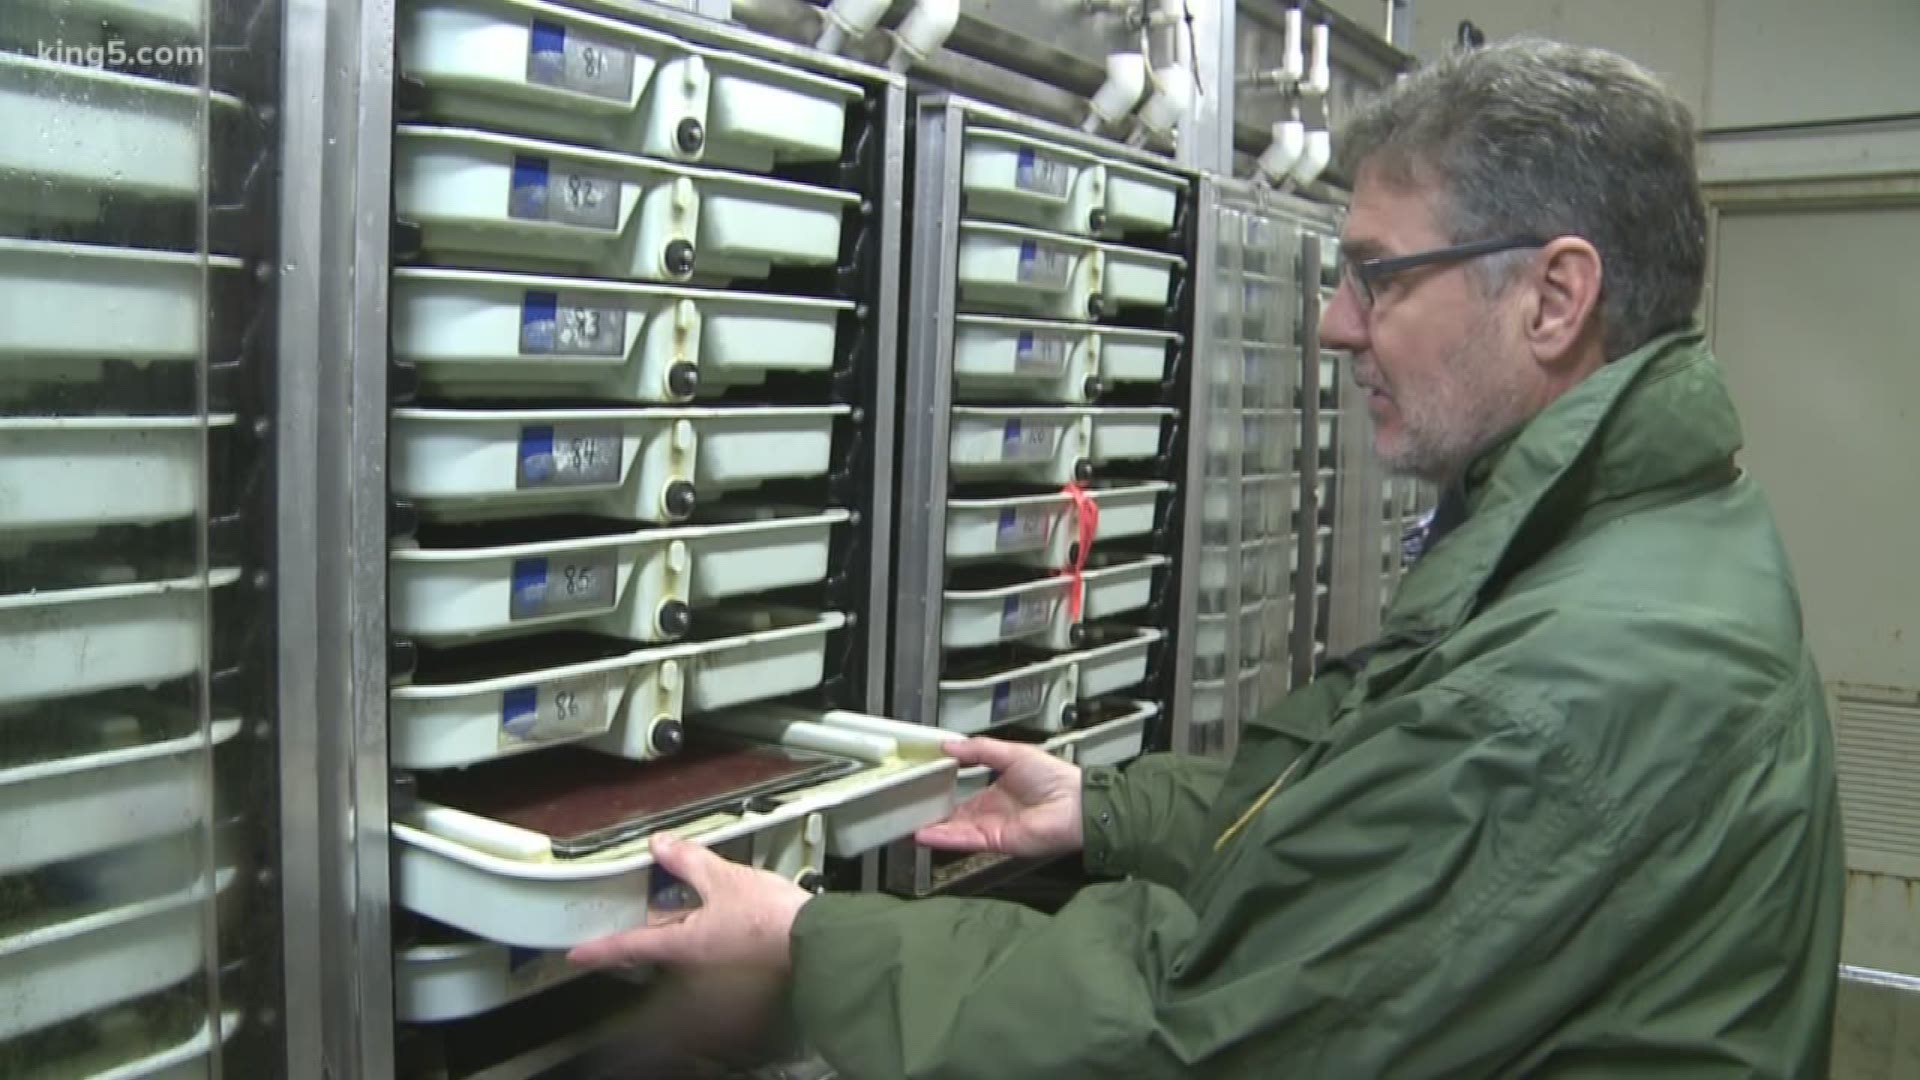 KING 5's Alison Morrow investigates the power outage of over 6 million salmon fry at a hatchery.